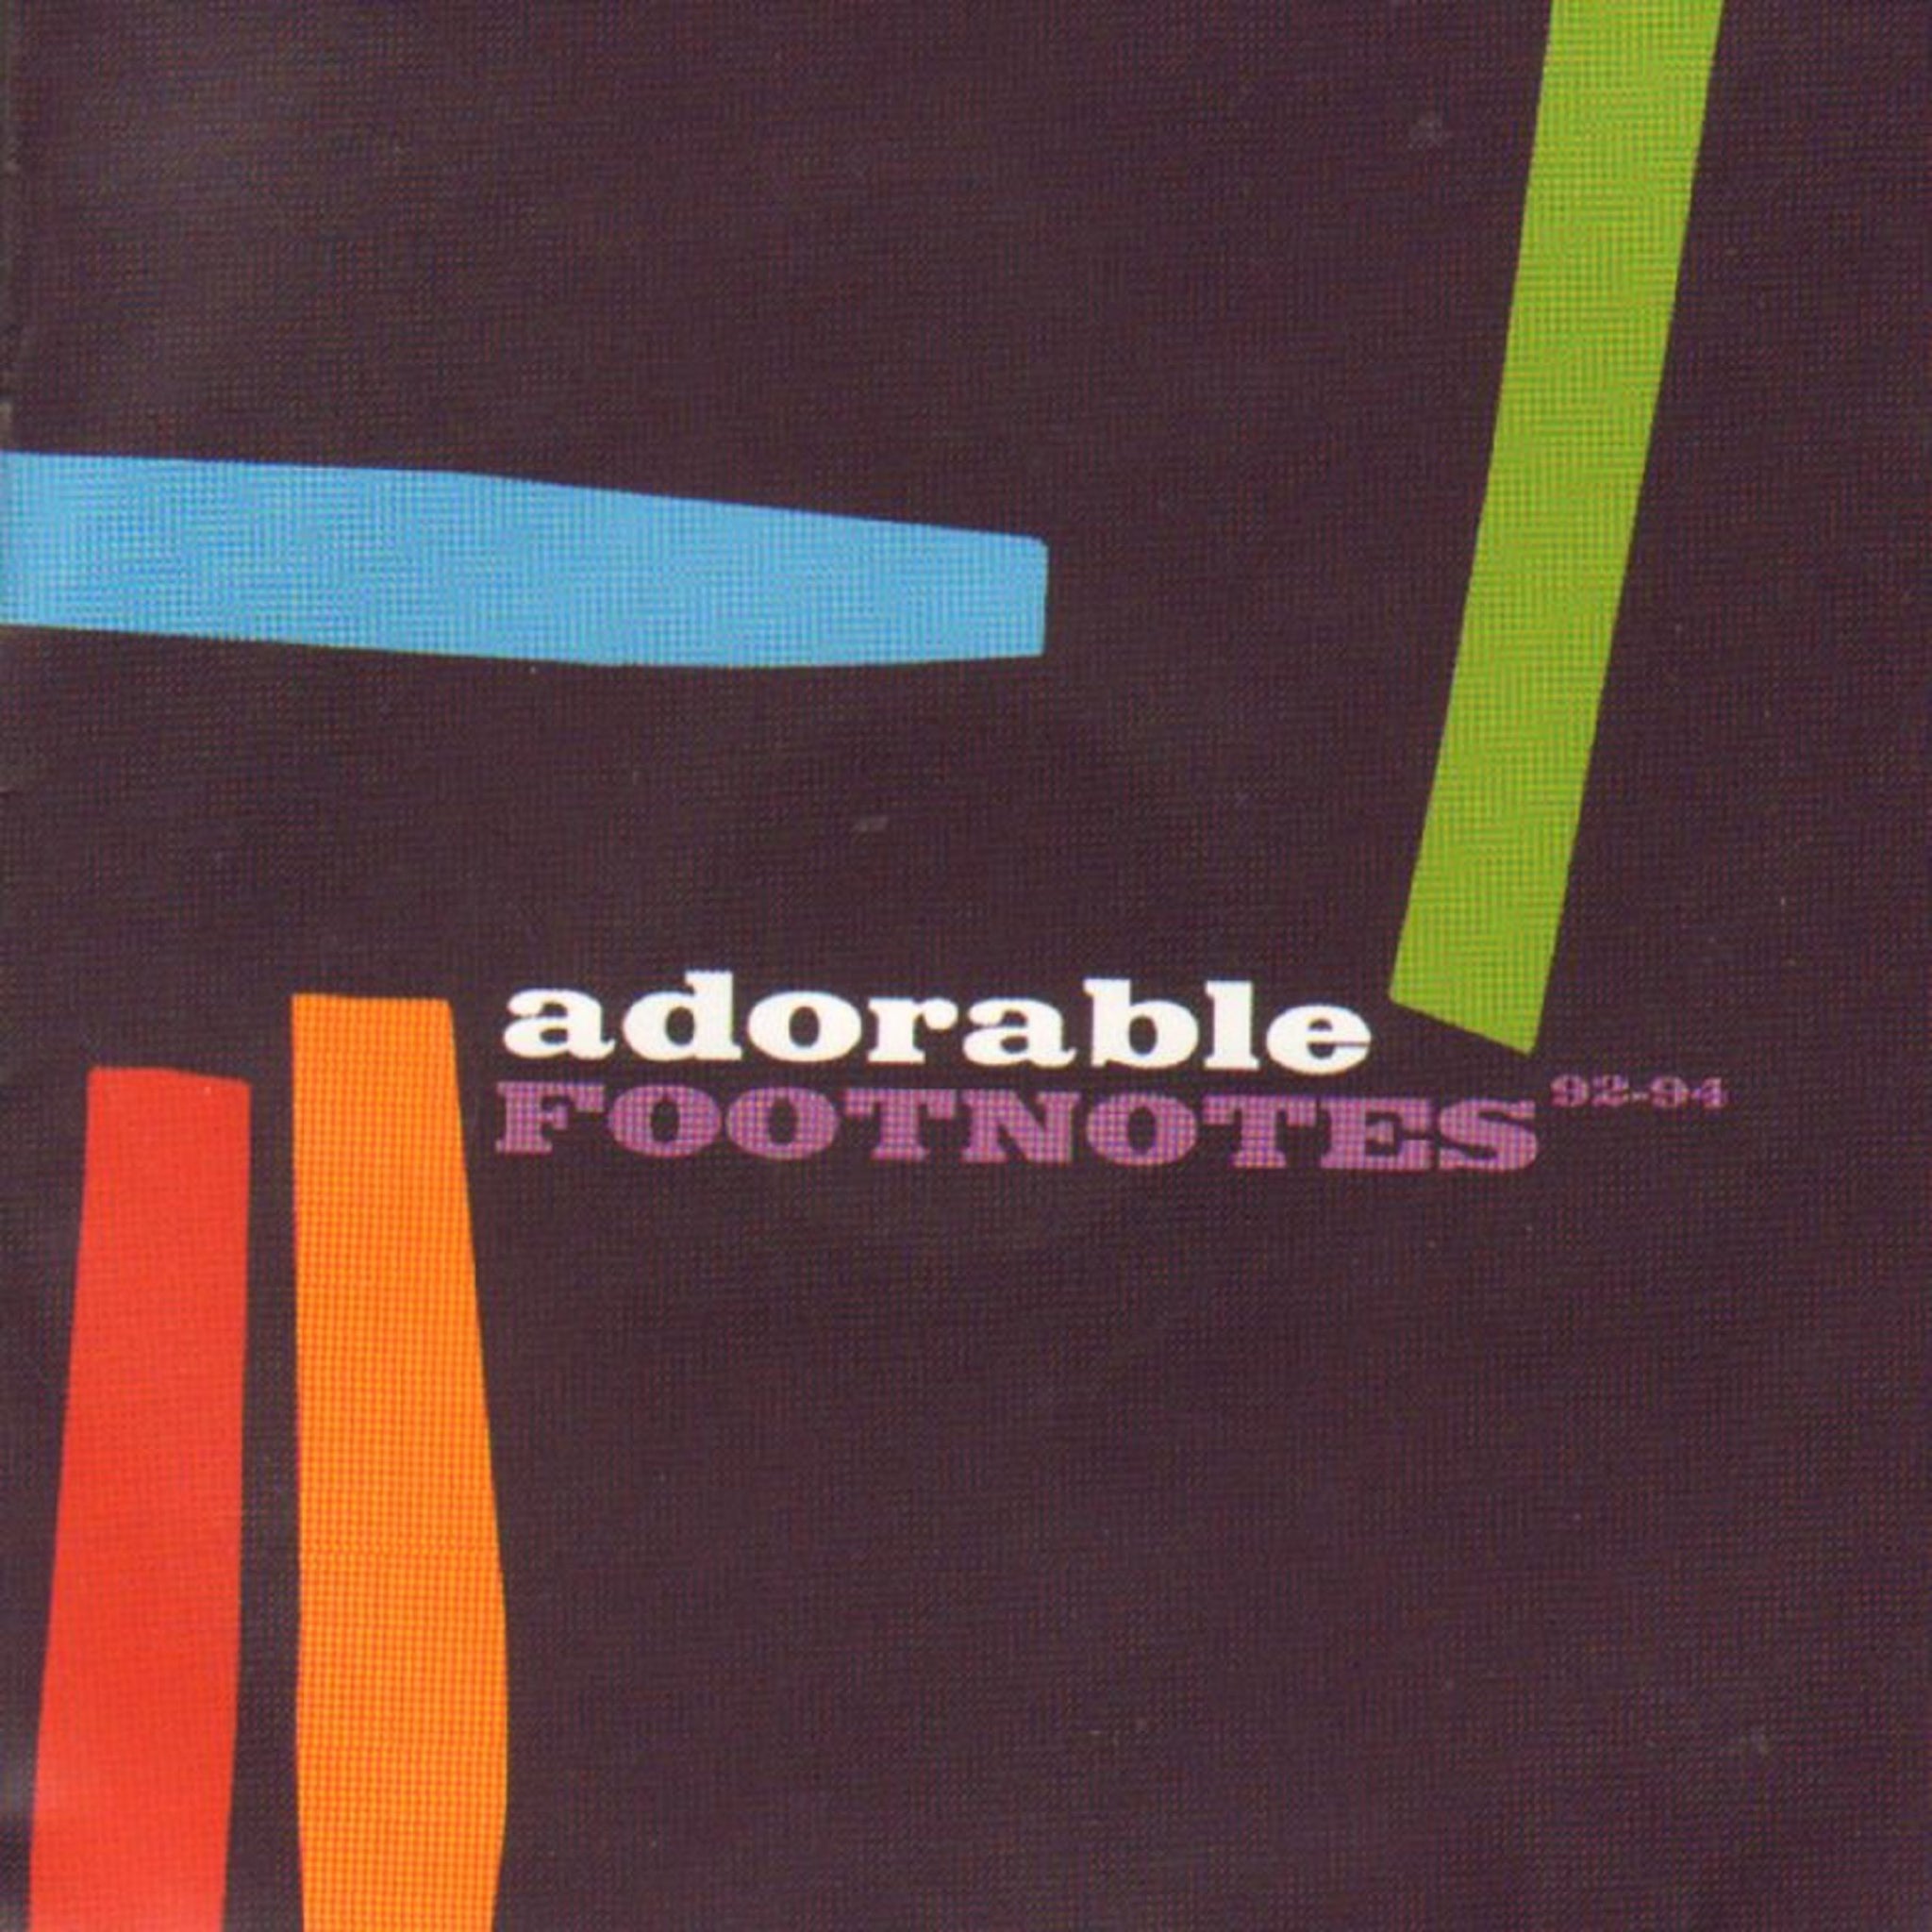 Adorable - Footnotes 92-94 (Cherry Red) CD